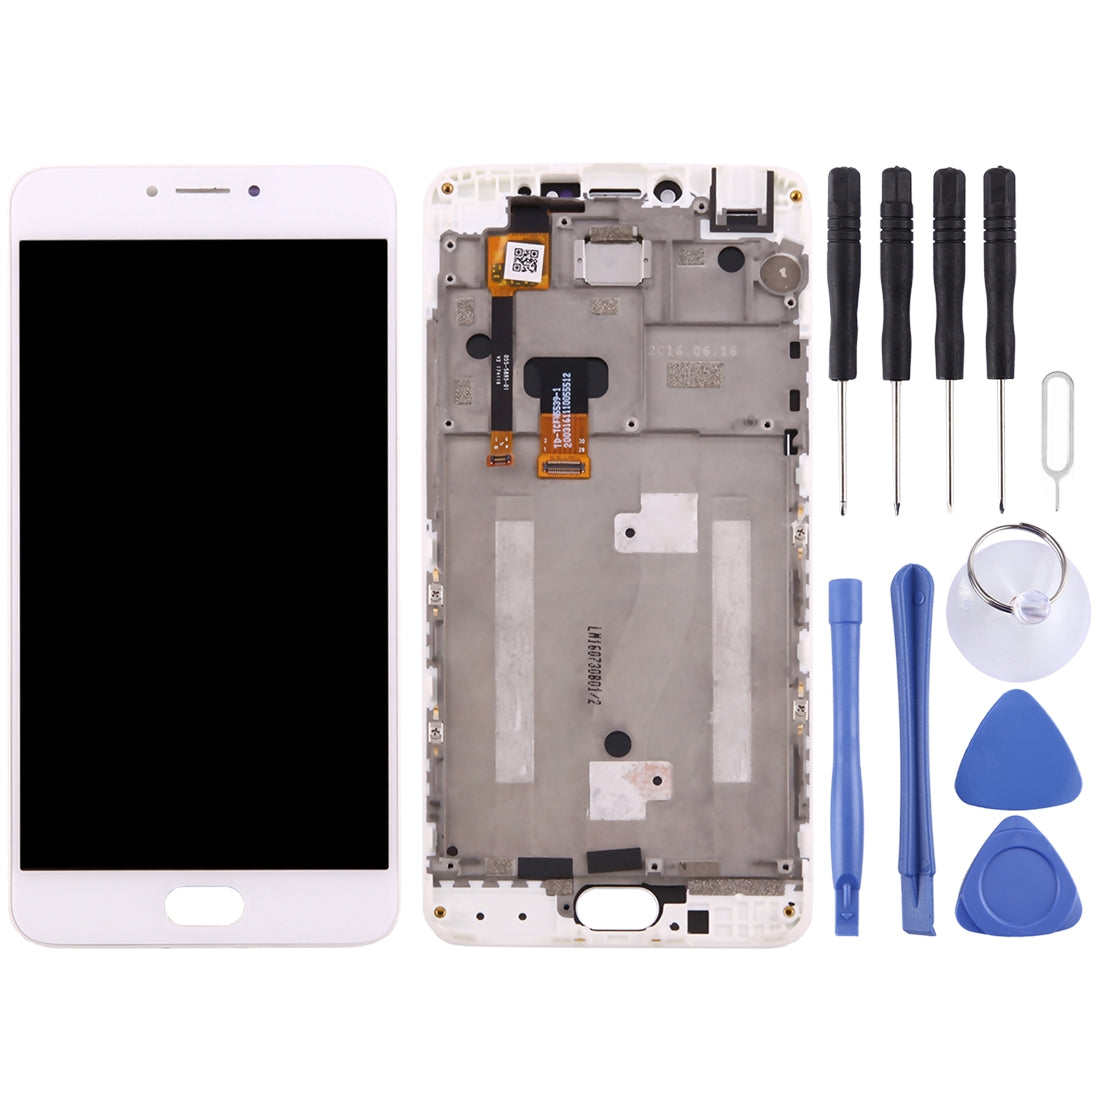 Ecran LCD + Tactile + Châssis Meizu M3 Note Meilan Note 3 (Version Chinoise) Blanc